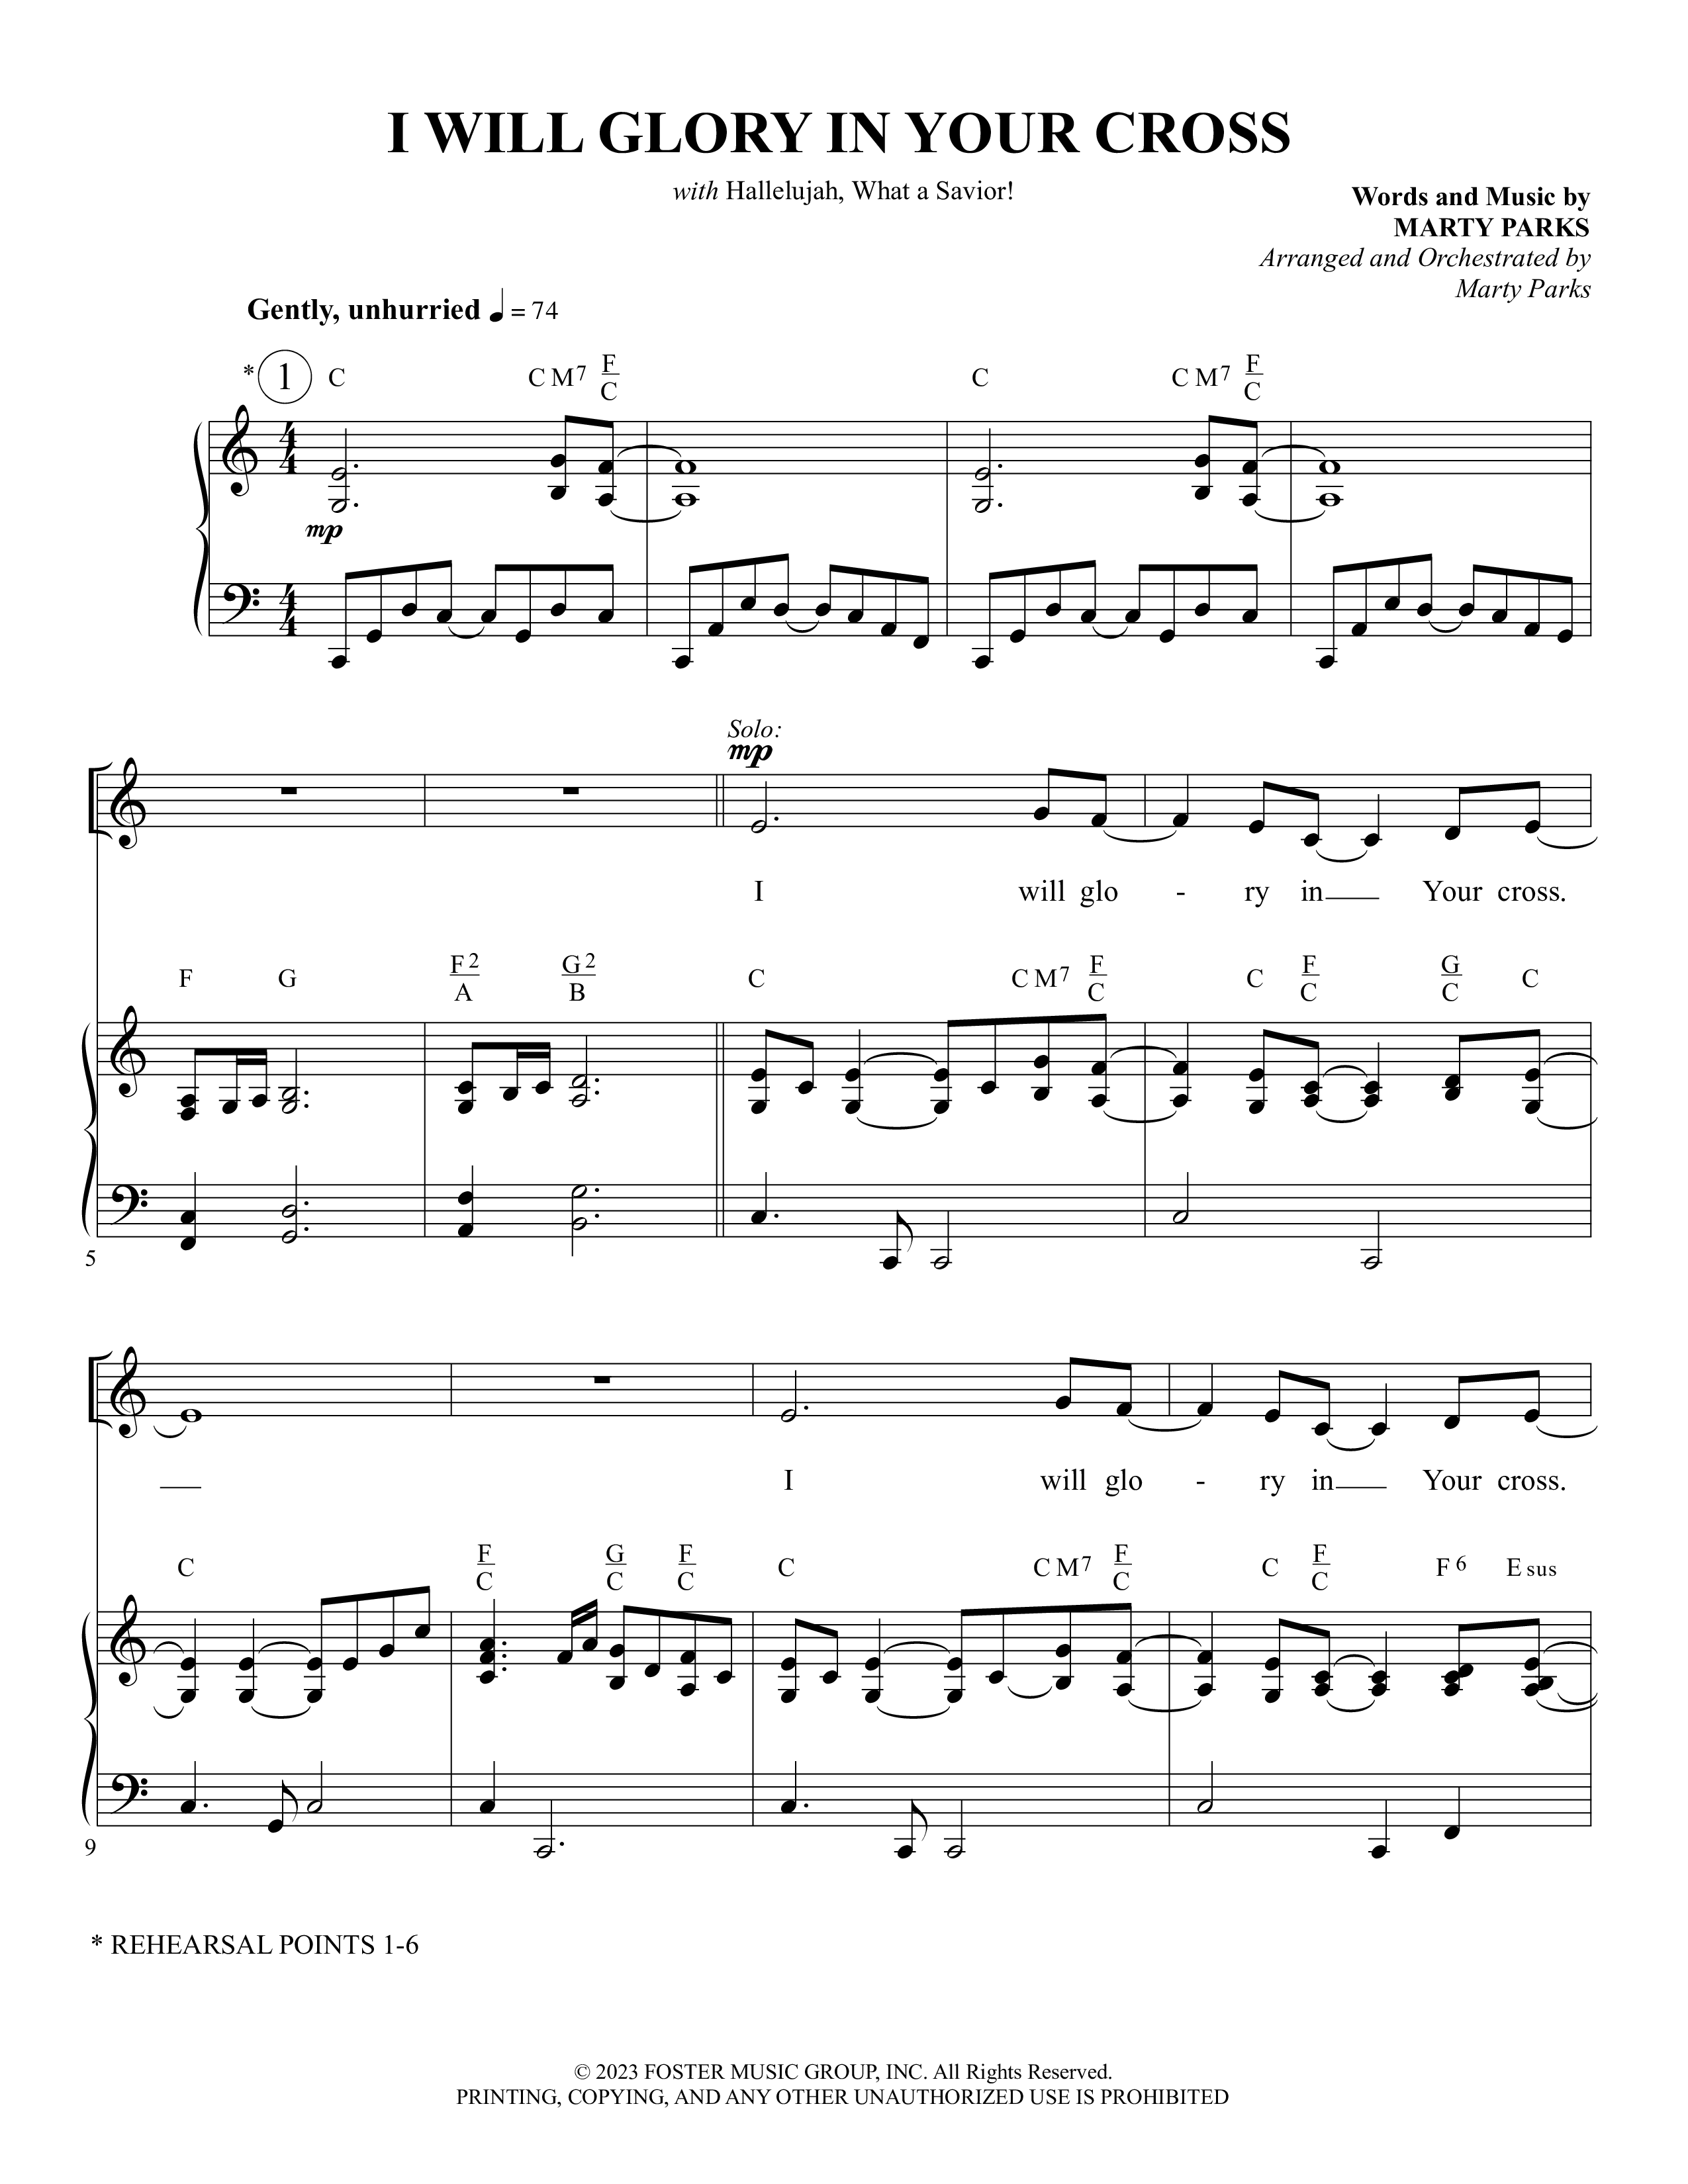 I Will Glory In Your Cross (with Hallelujah What A Savior) Piano/Choir (SATB) (Foster Music Group / Arr. Marty Parks)